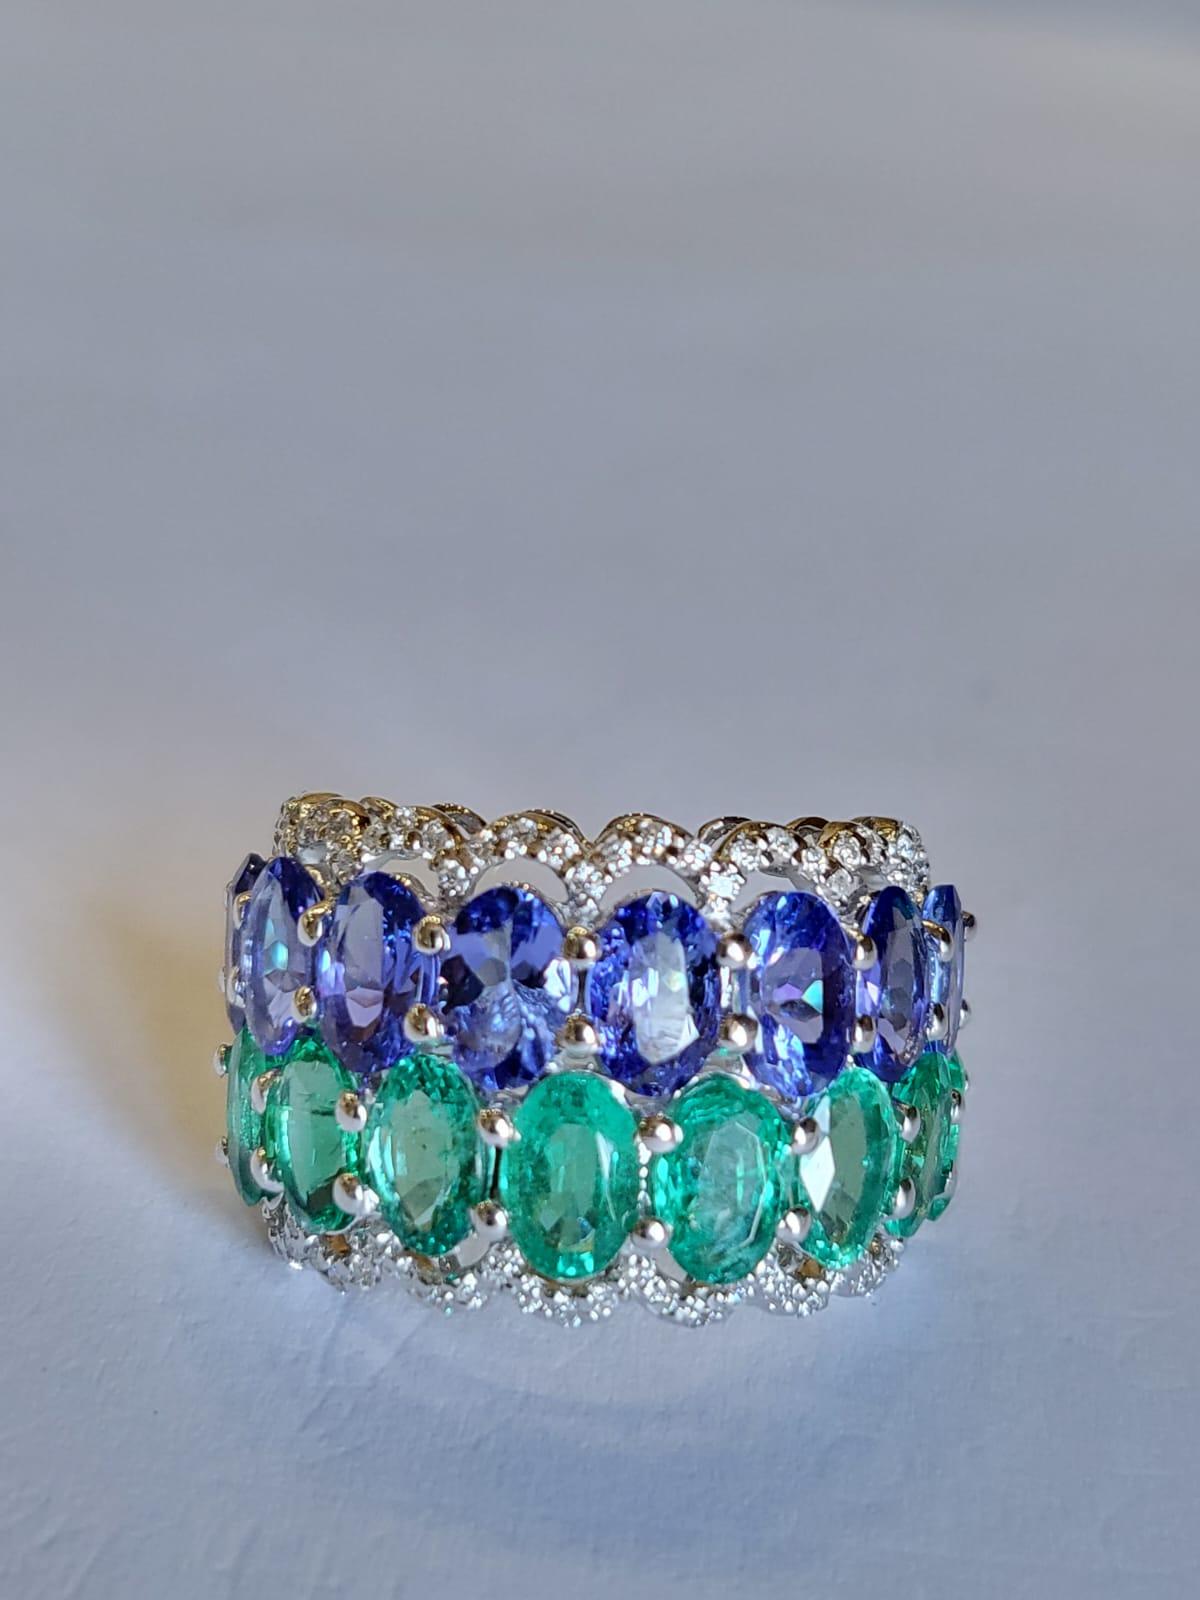 A very gorgeous and fine crafted, Emerald & Tanzanite Band Ring set in 18K White Gold & Diamonds. The weight of the Emerald ovals is 3.28 carats. The Emerald is of Zambian origin and is completely natural, without any treatment. The weight of the